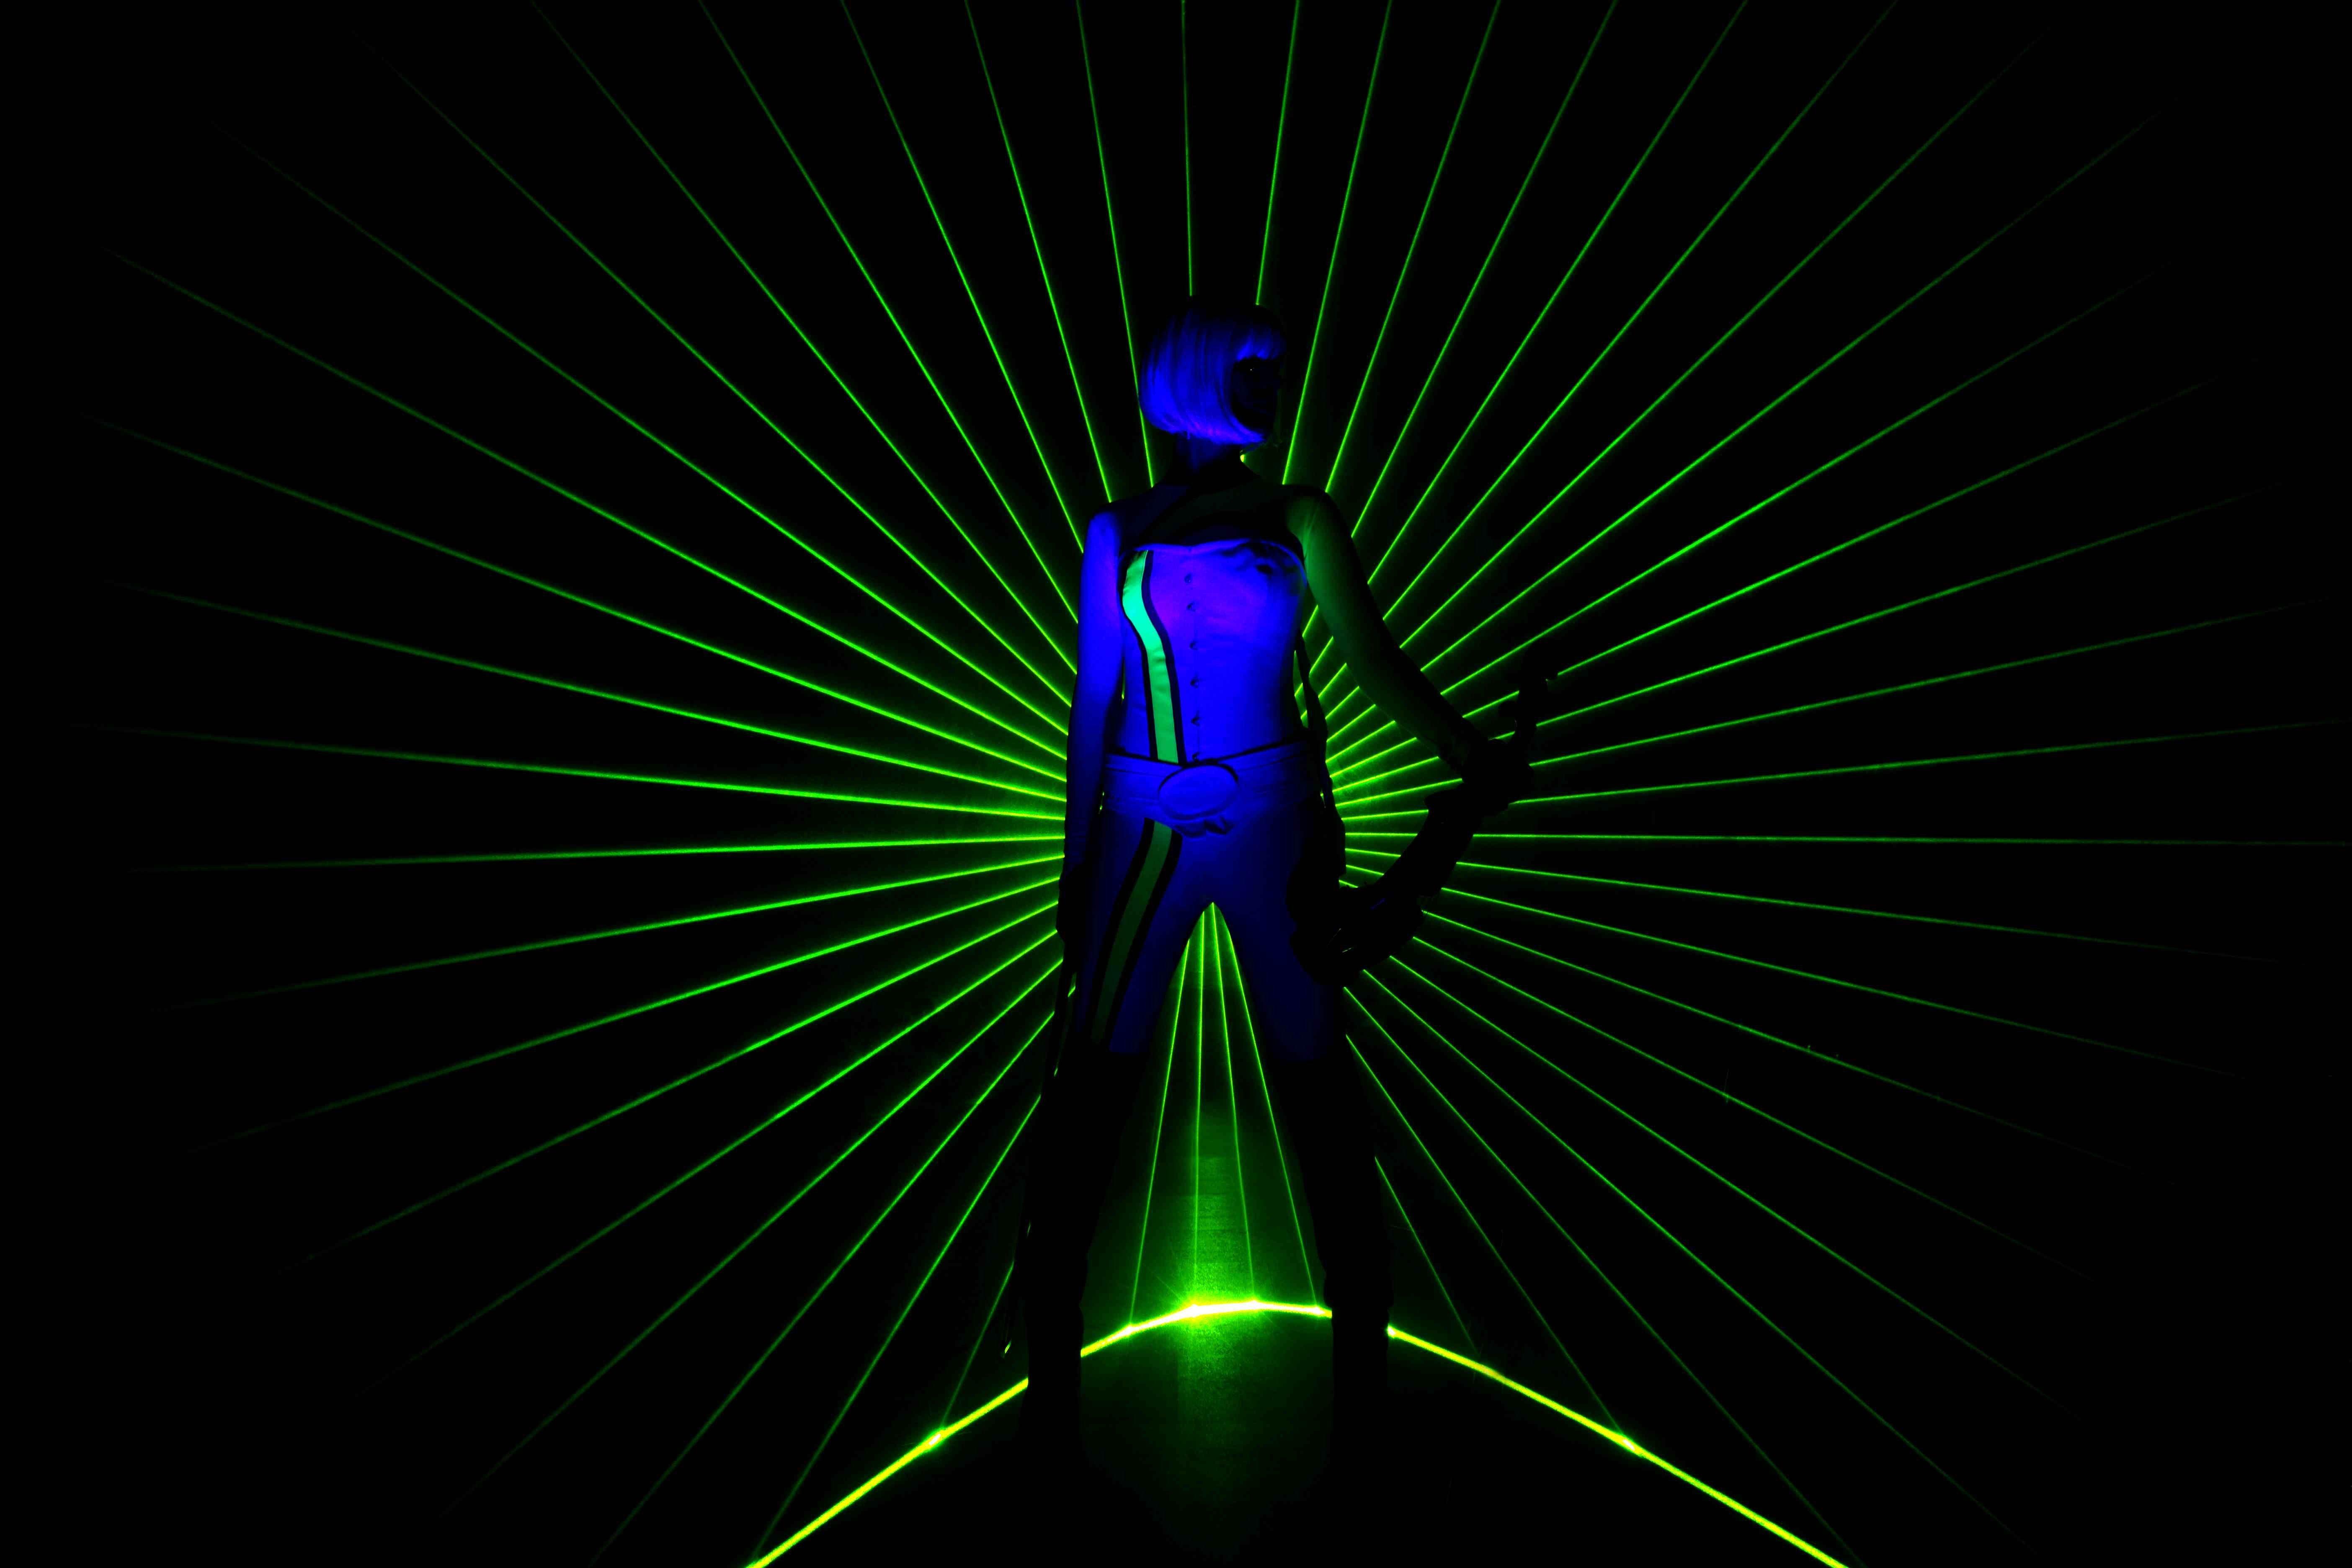 show, laser, abstract tumblr wallpaper, colourful picture amazing